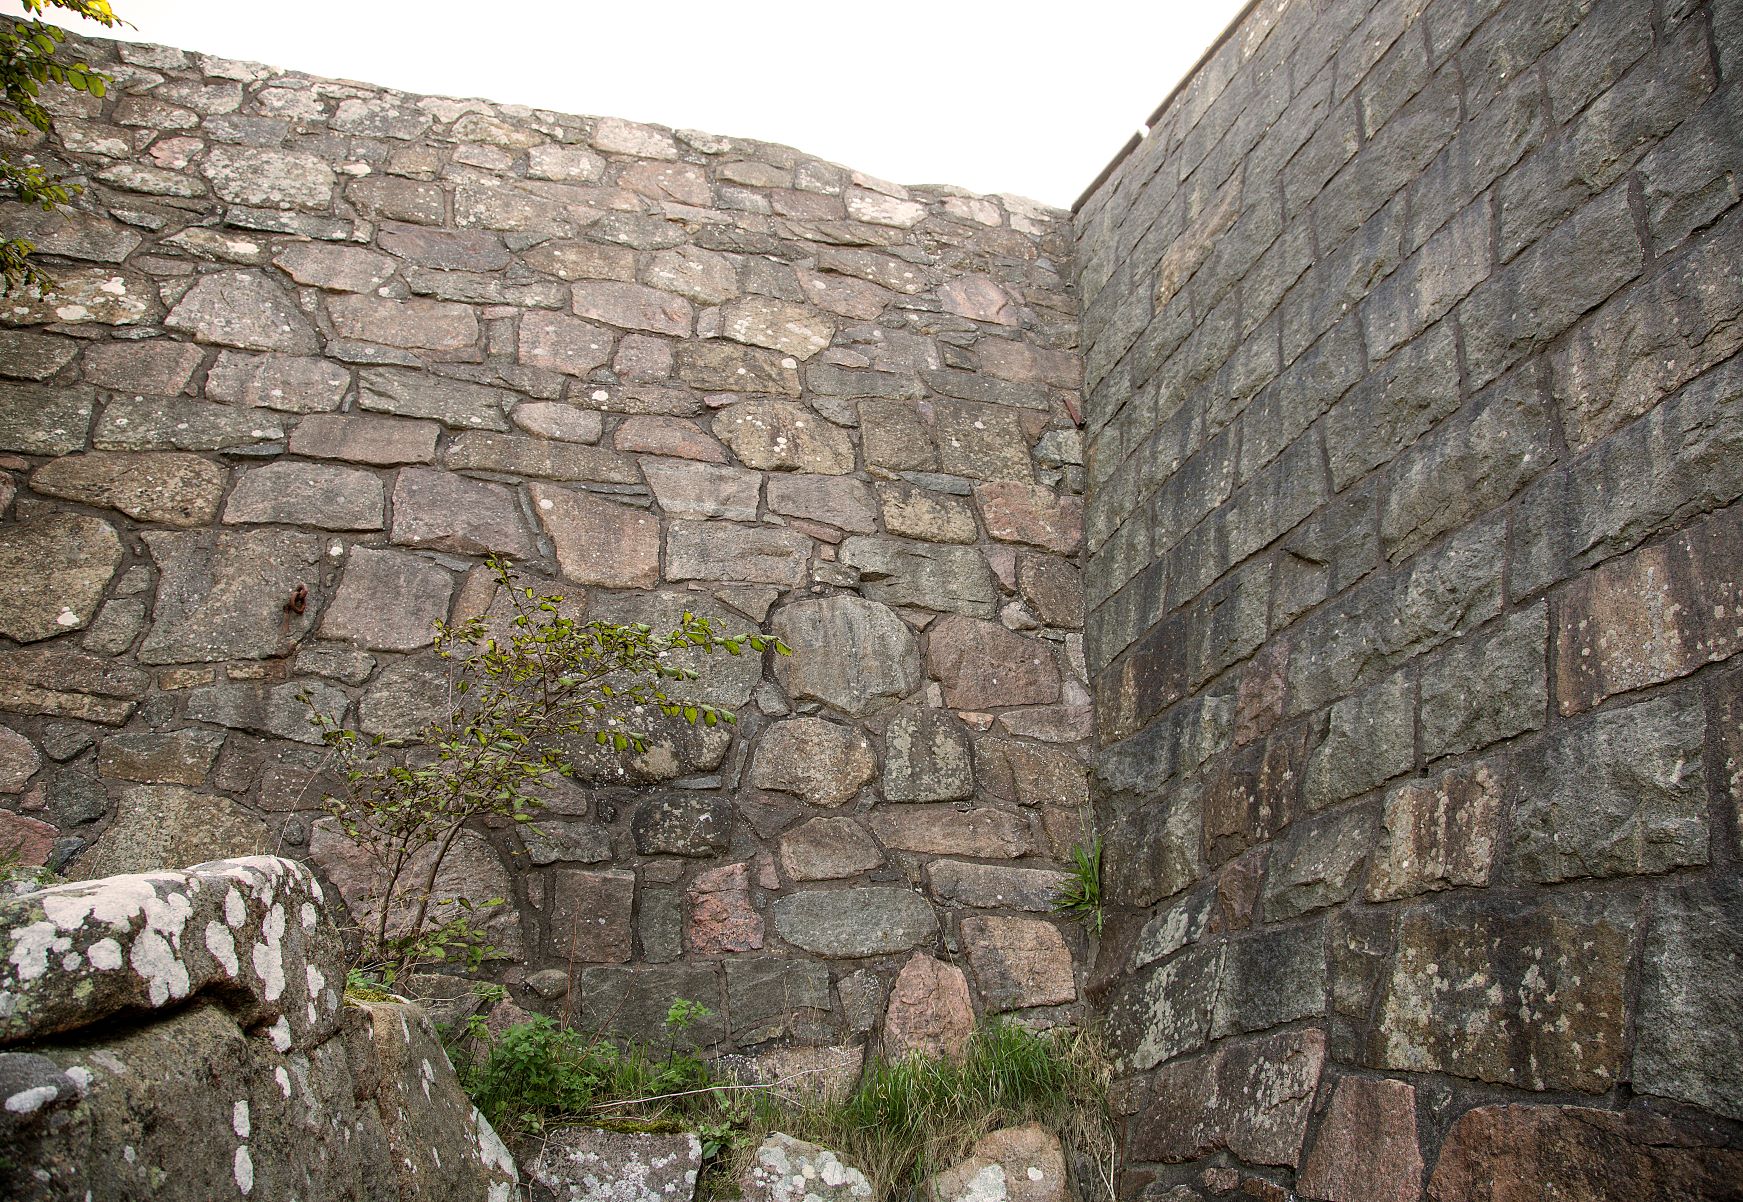 This wall on the west side of the fortress clearly shows the difference between the original wall on the left and a restored wall from the 20th century on the right.